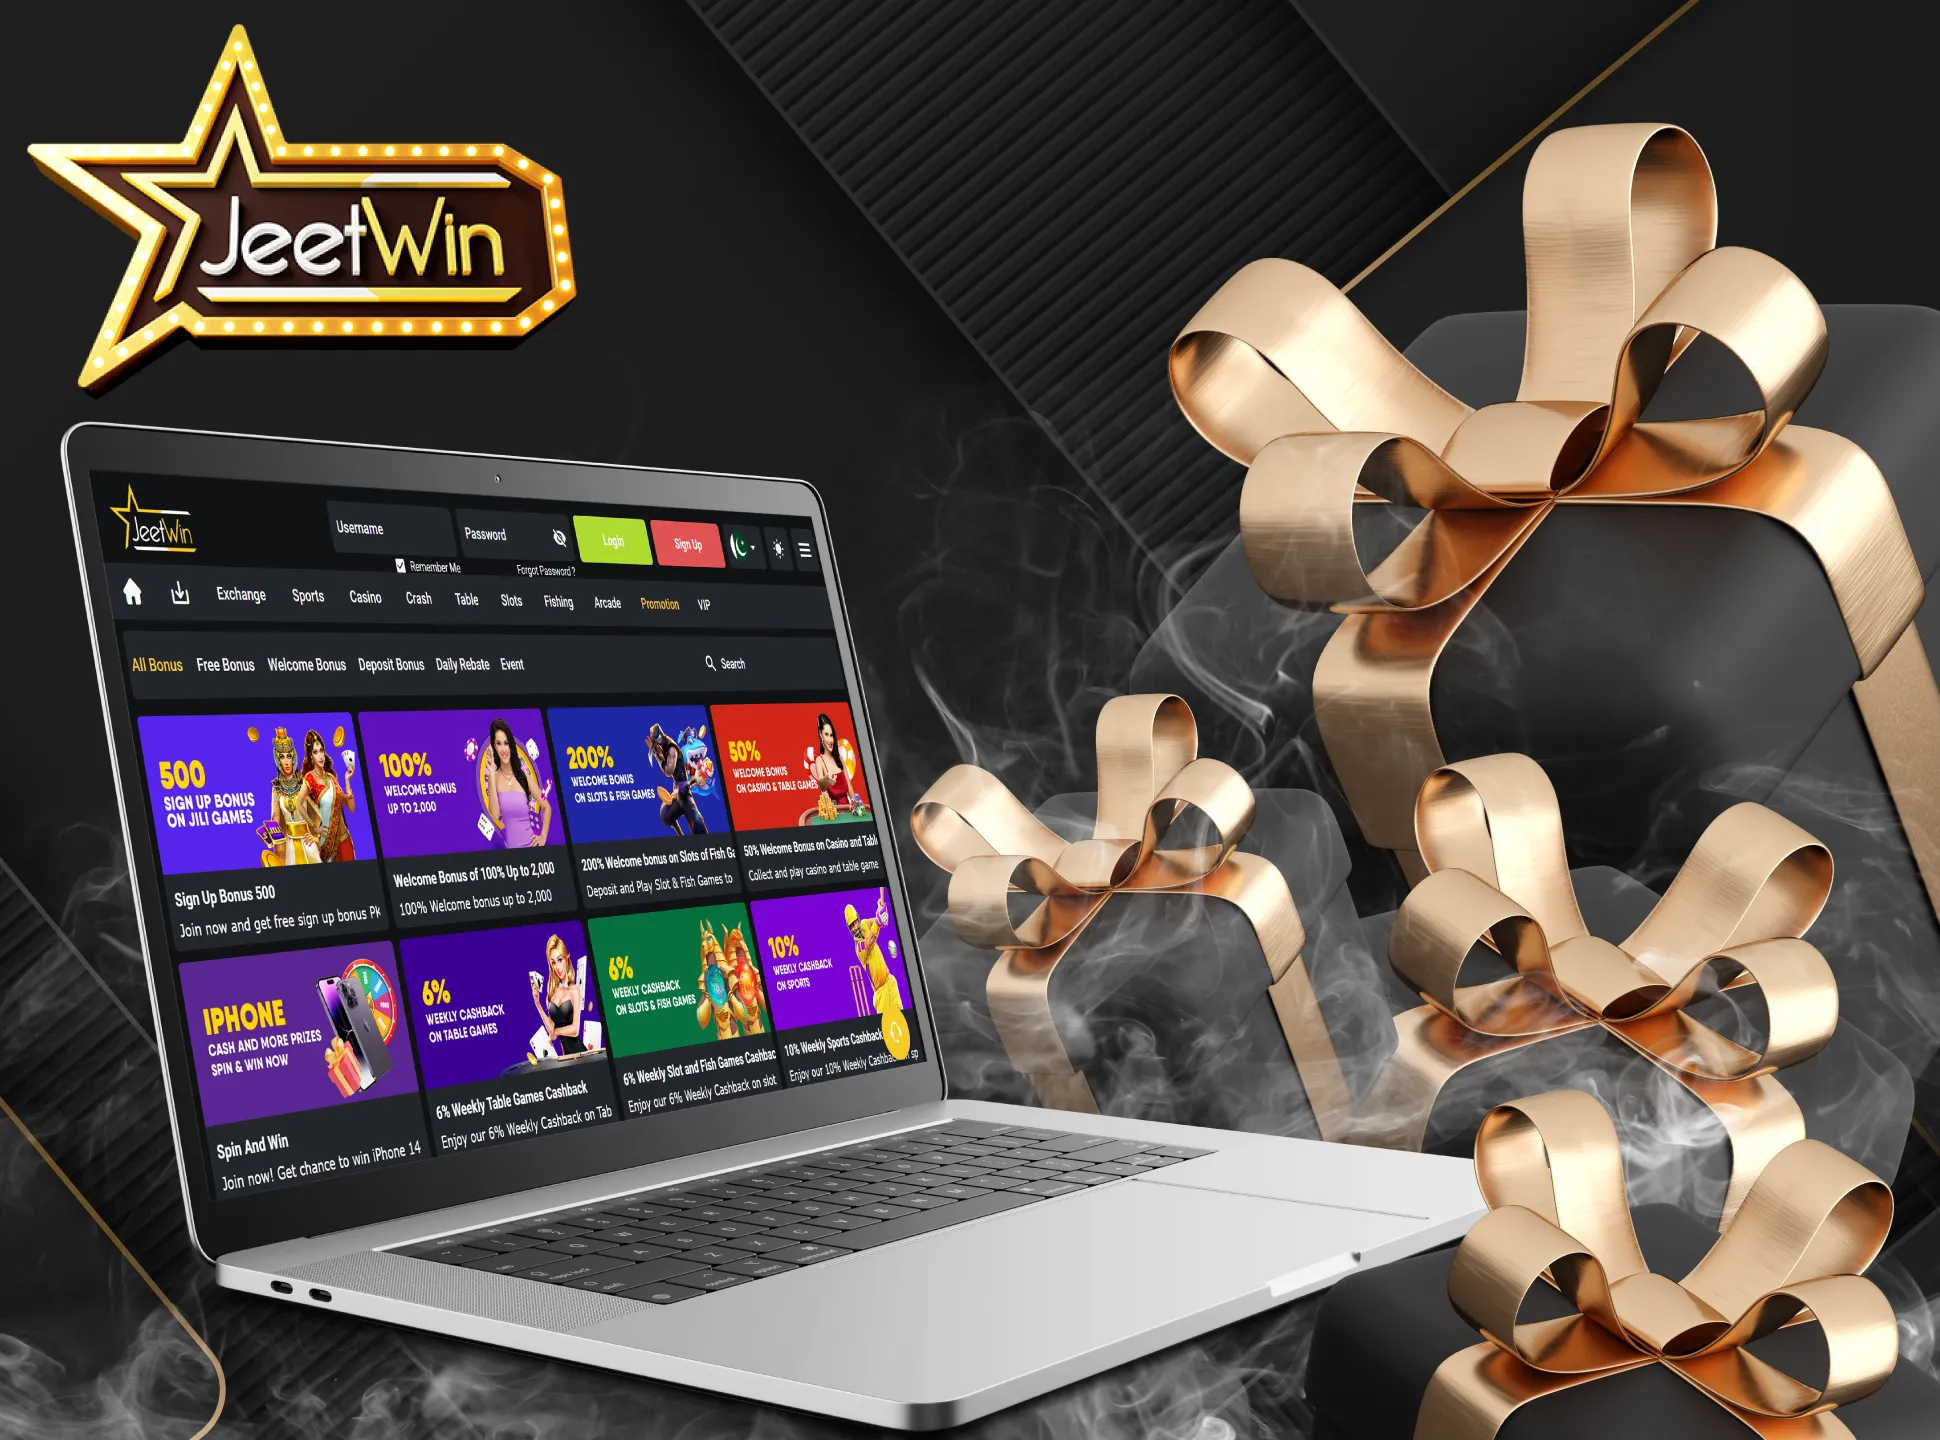 Find out how to get a bonus after signing up for an account at JeetWin.